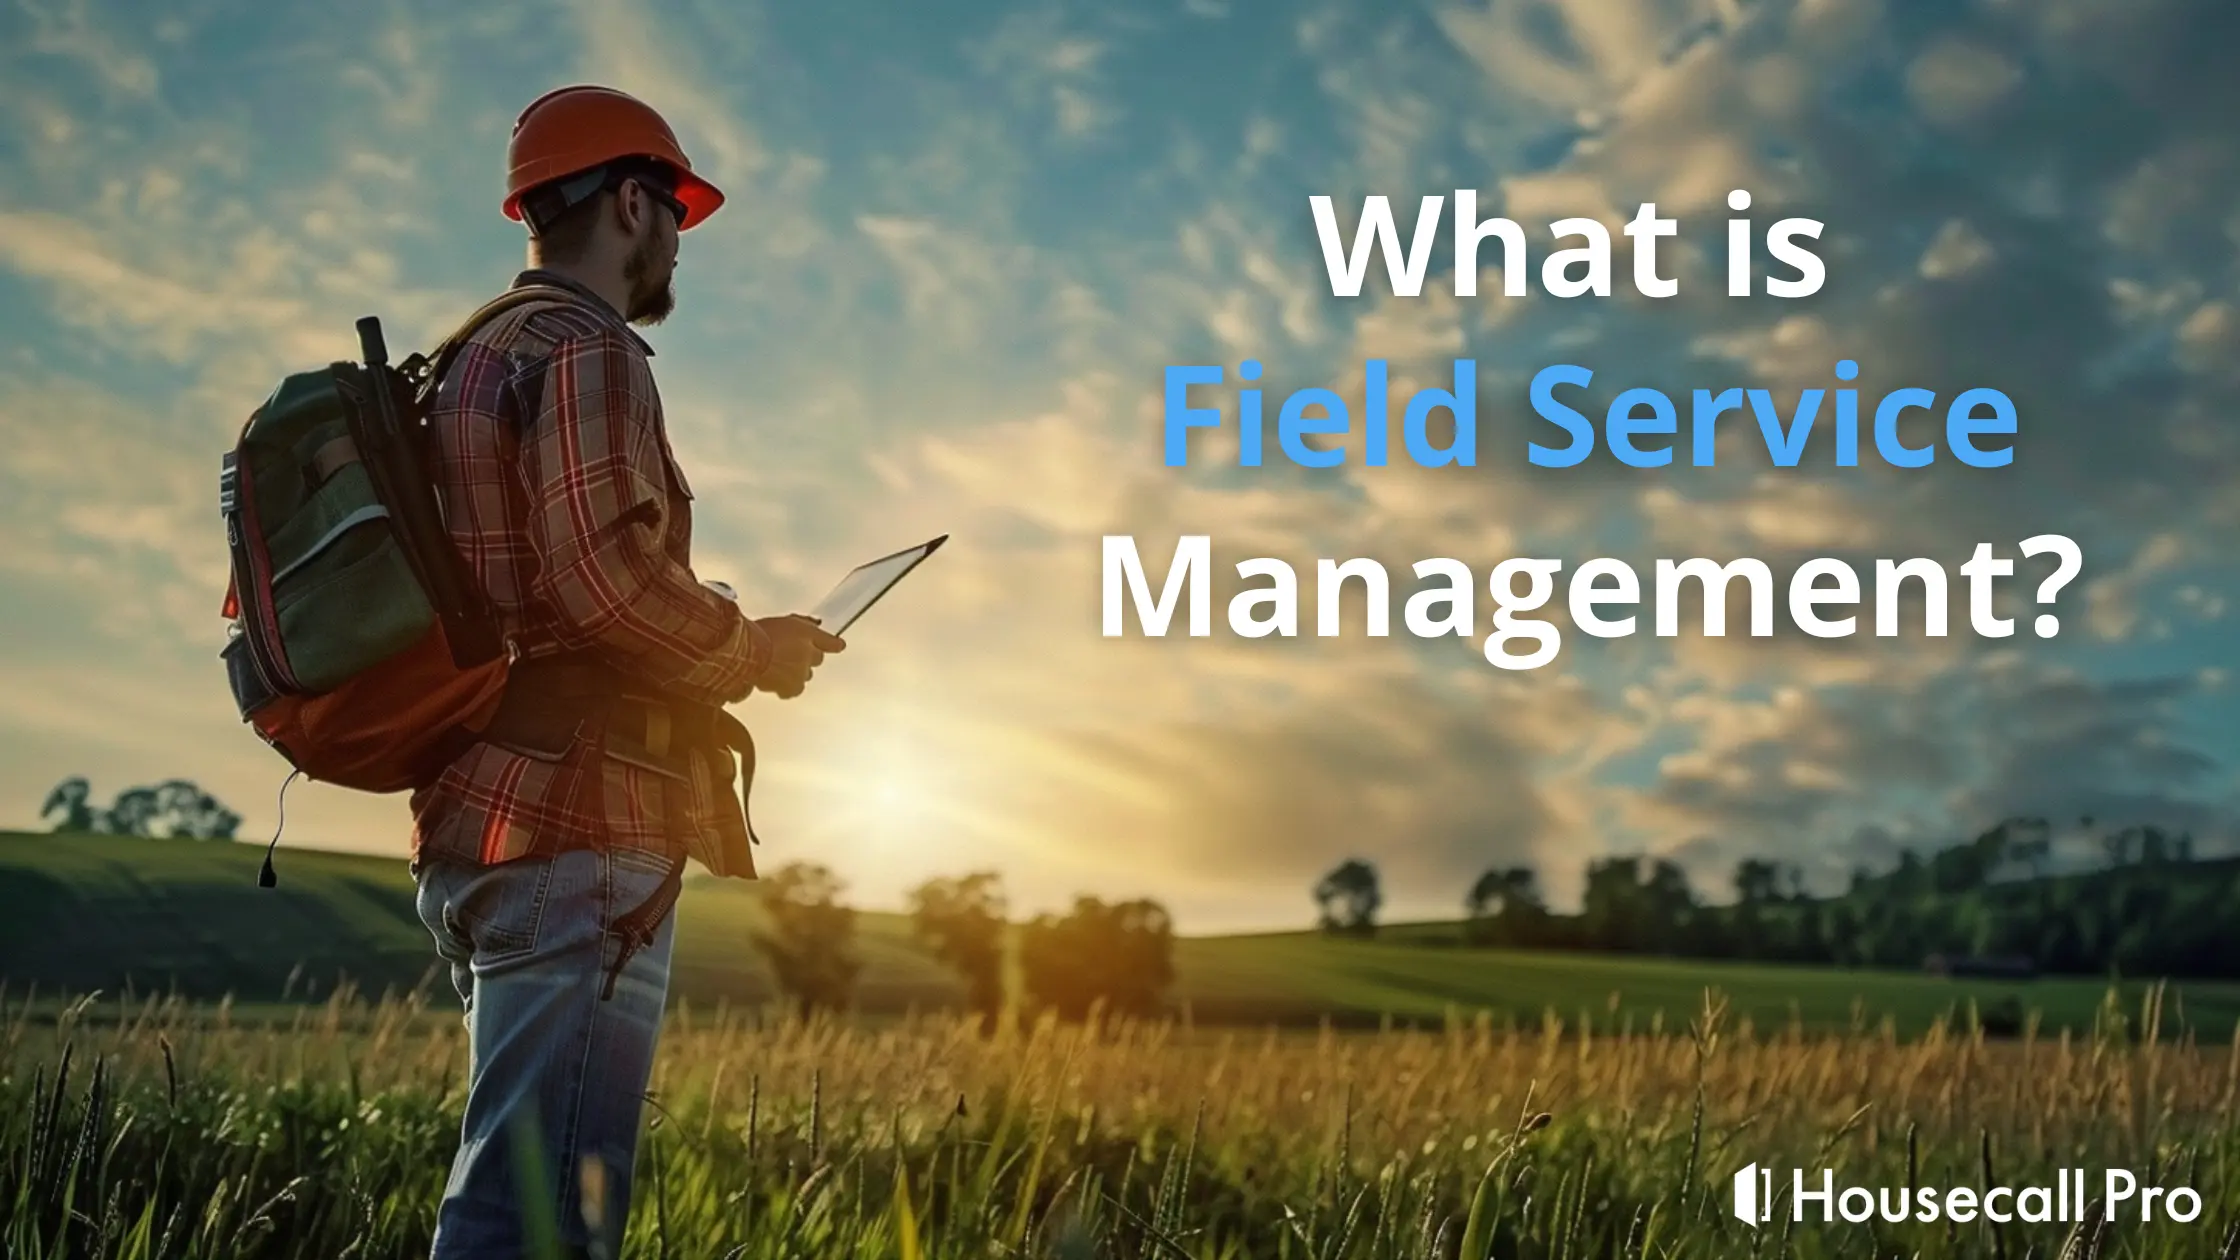 20 Key Field Service Management Software Features to Look for